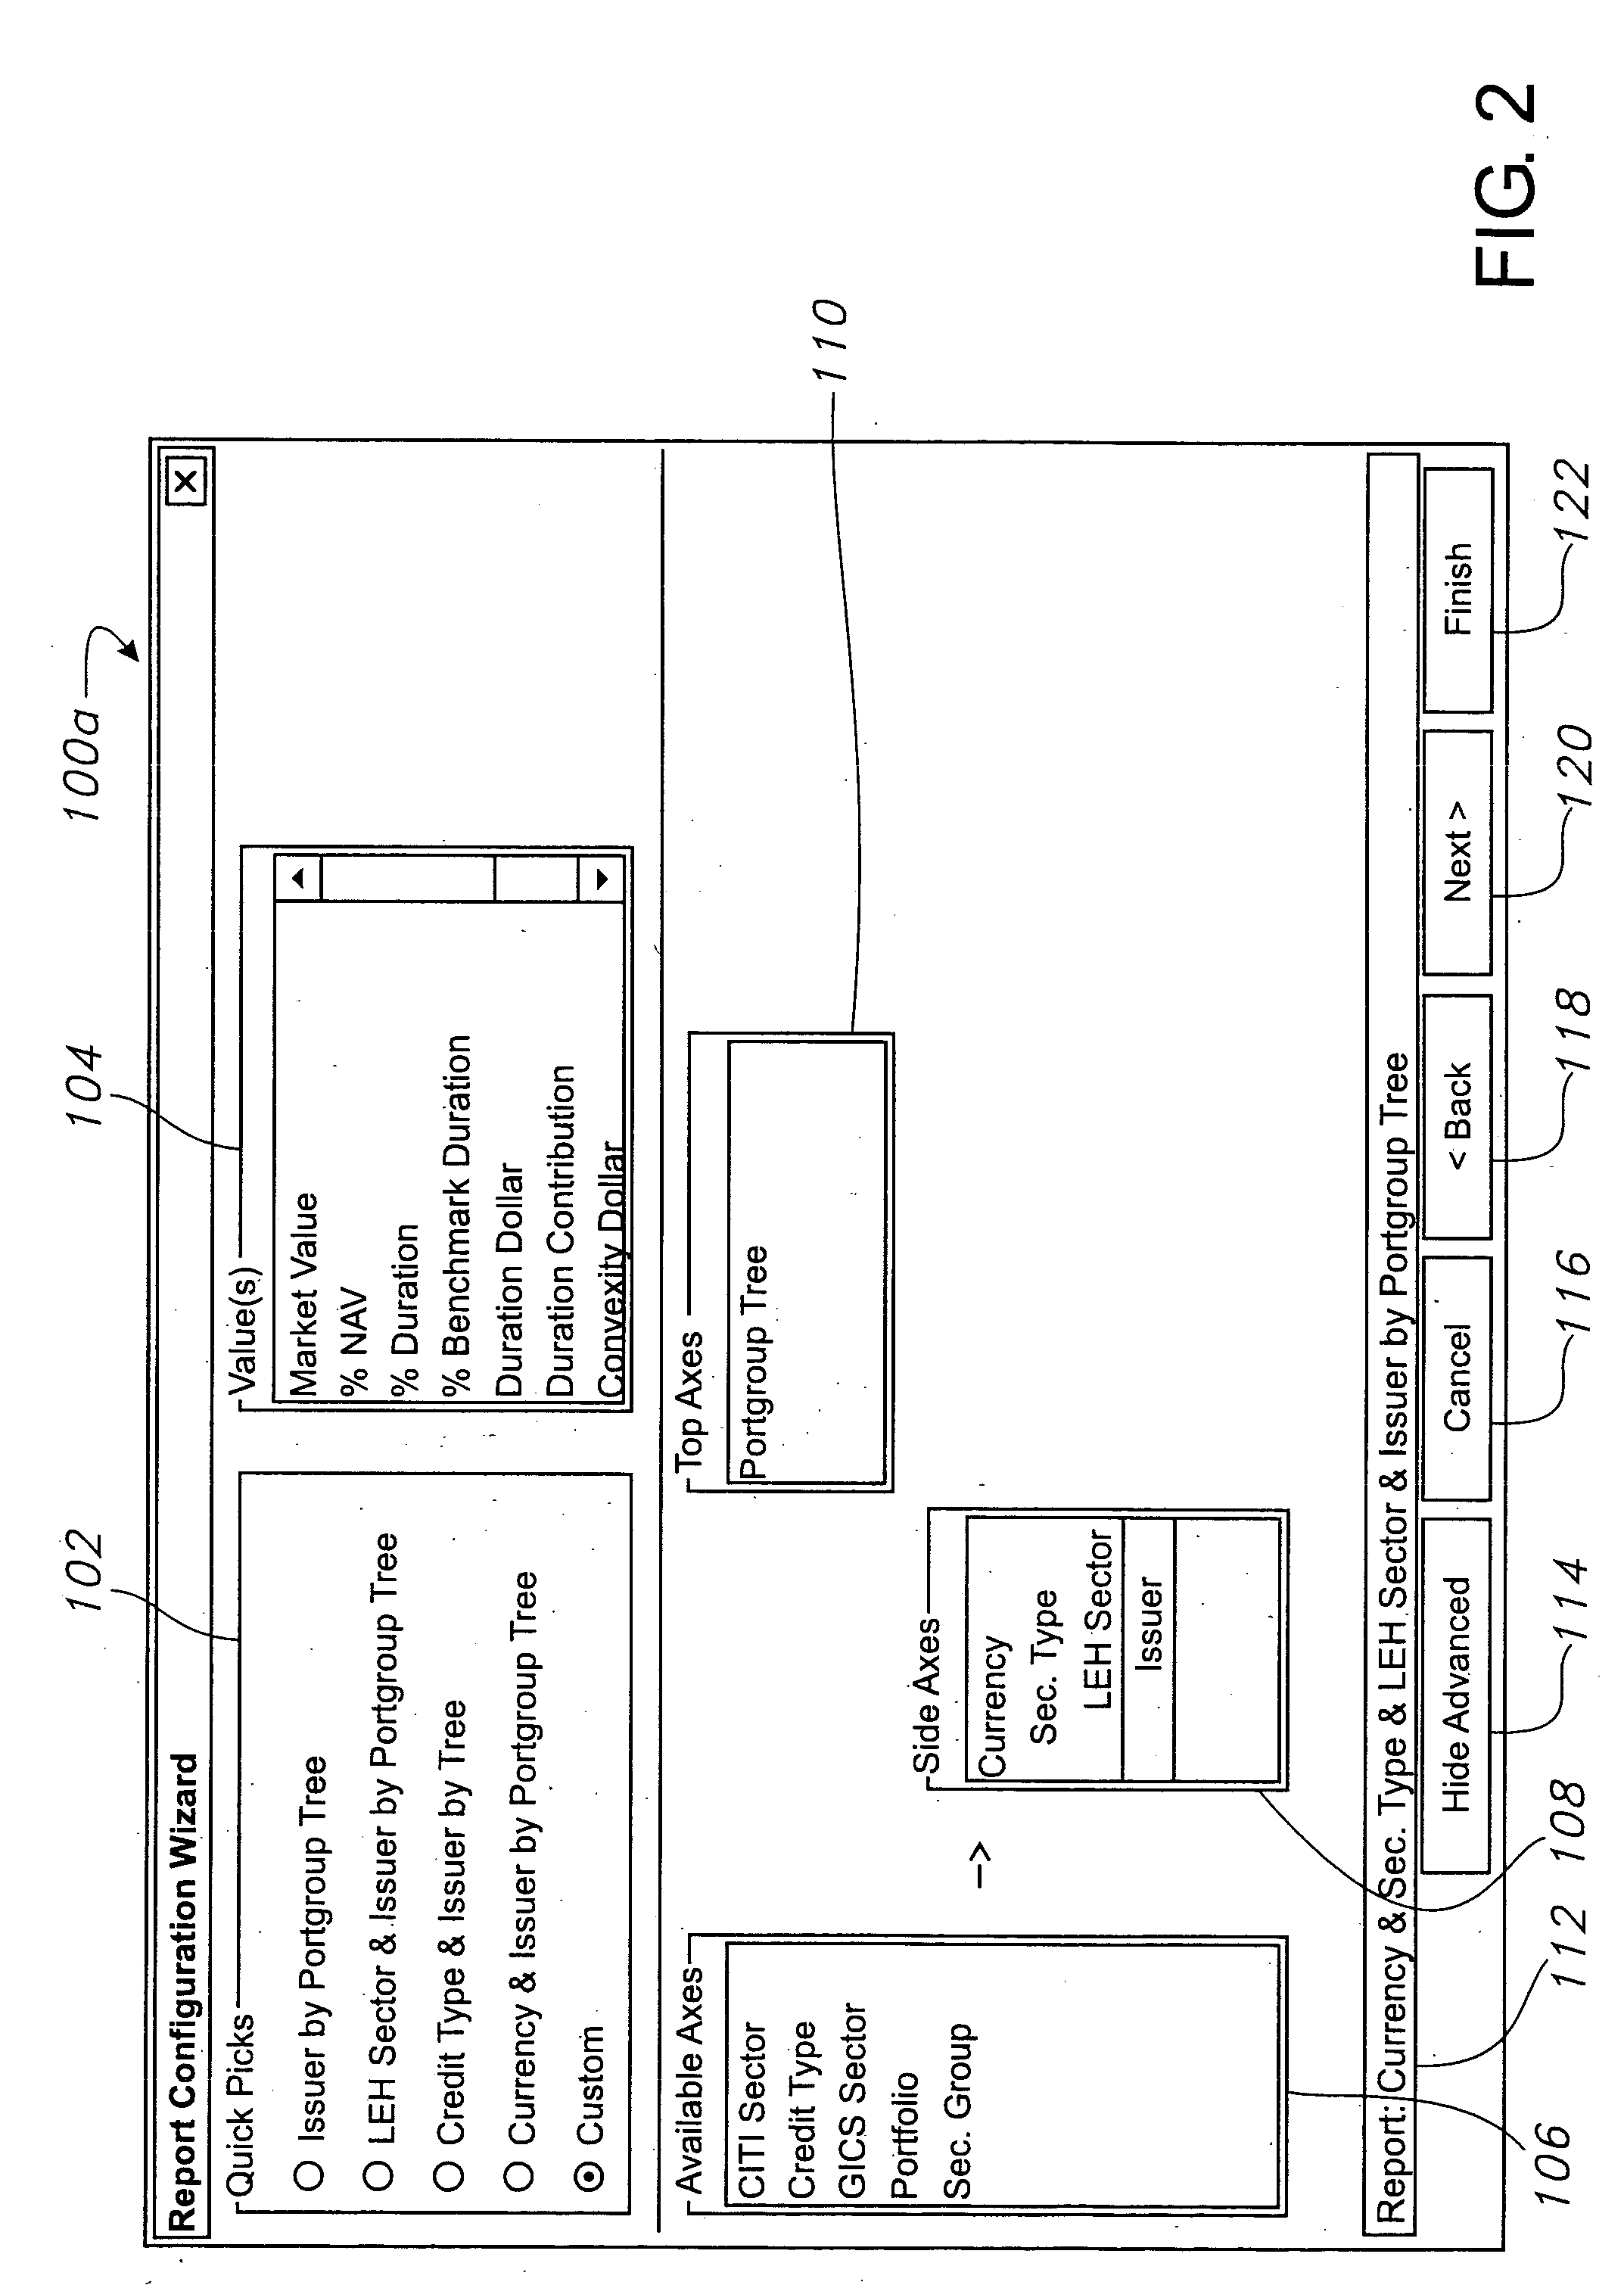 System and method for evaluating exposure across a group of investment portfolios by category